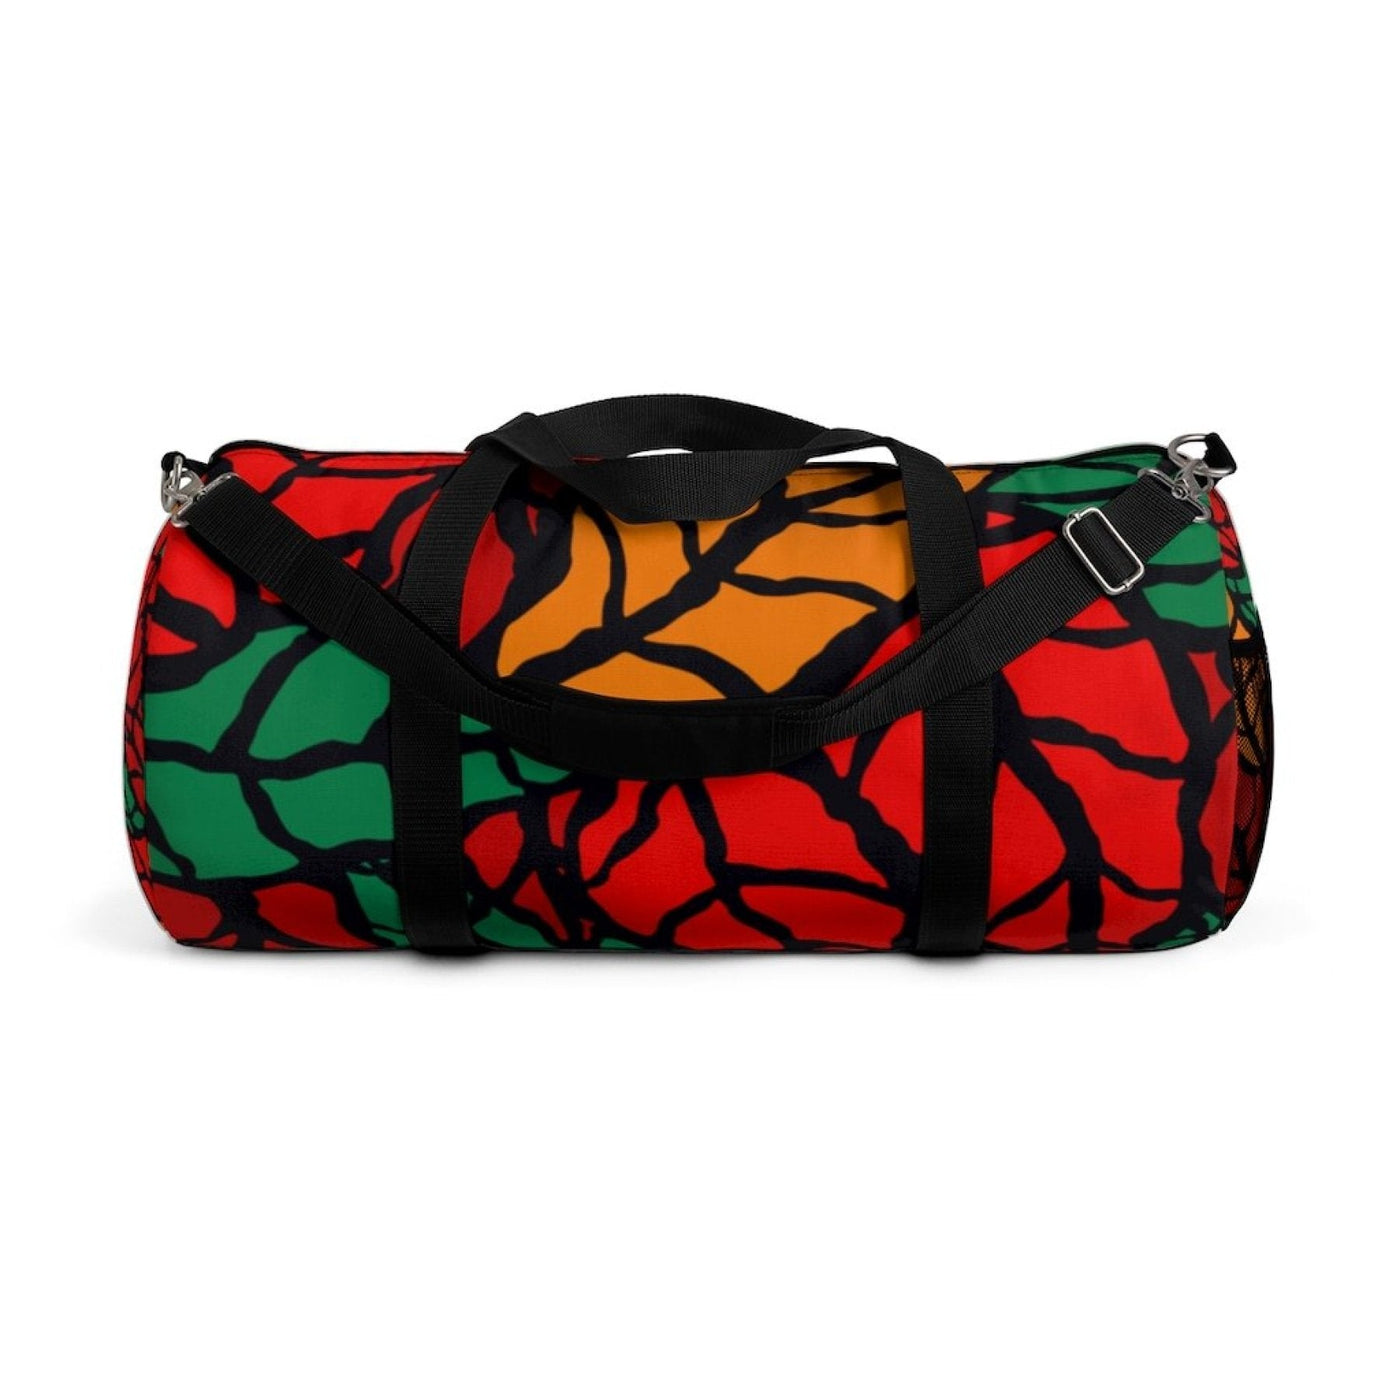 Duffel Bag Carry On Luggage Autumn Red Leaves - Bags | Duffel Bags